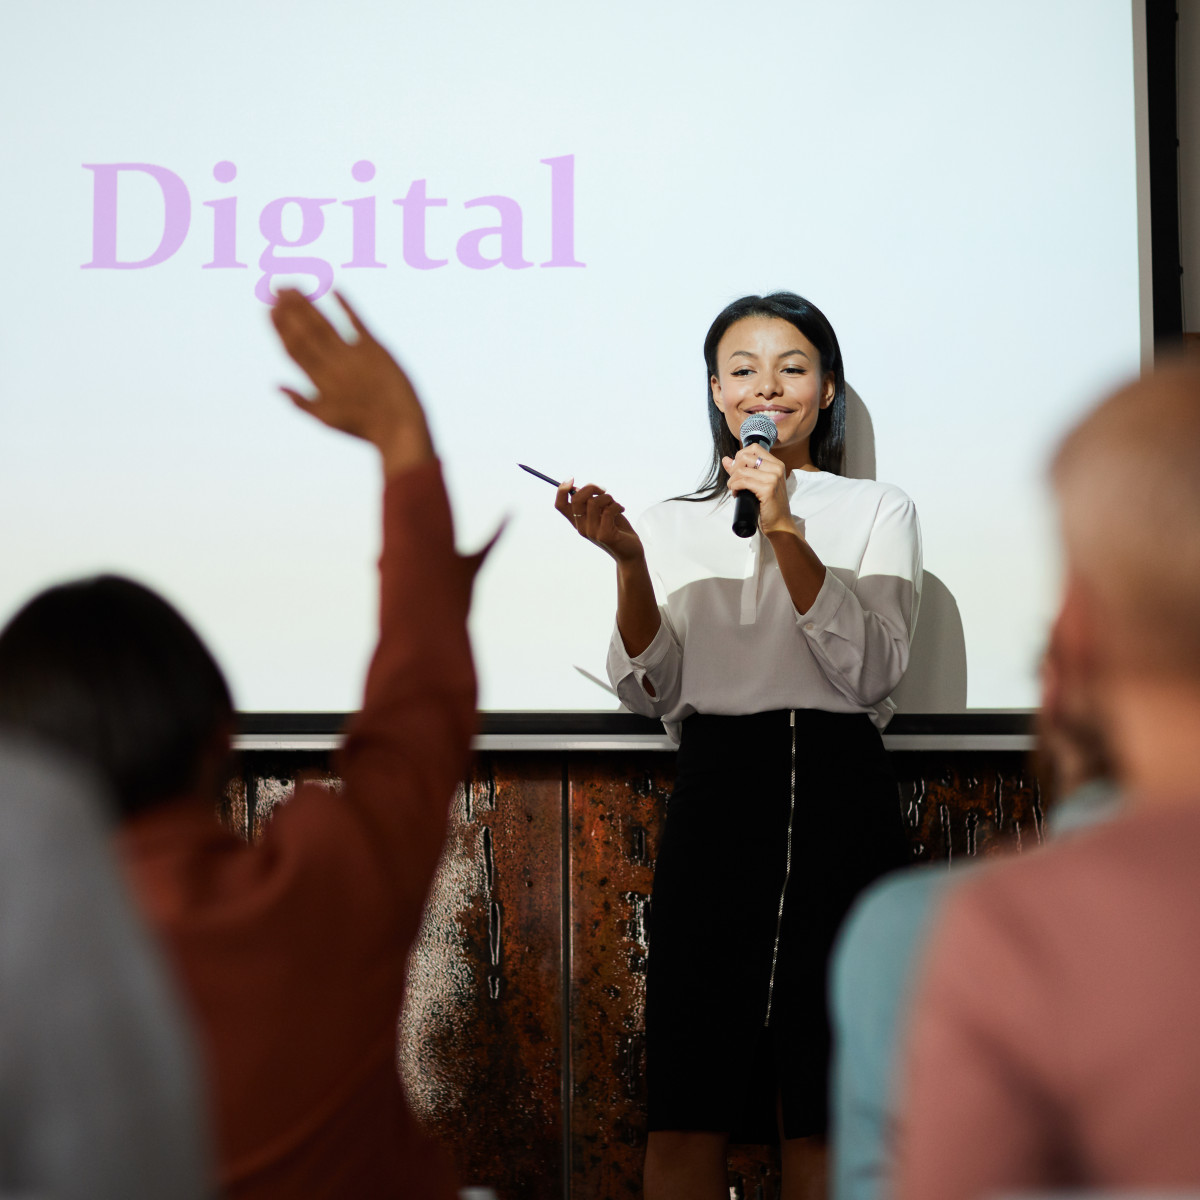 woman presenting digital to a group